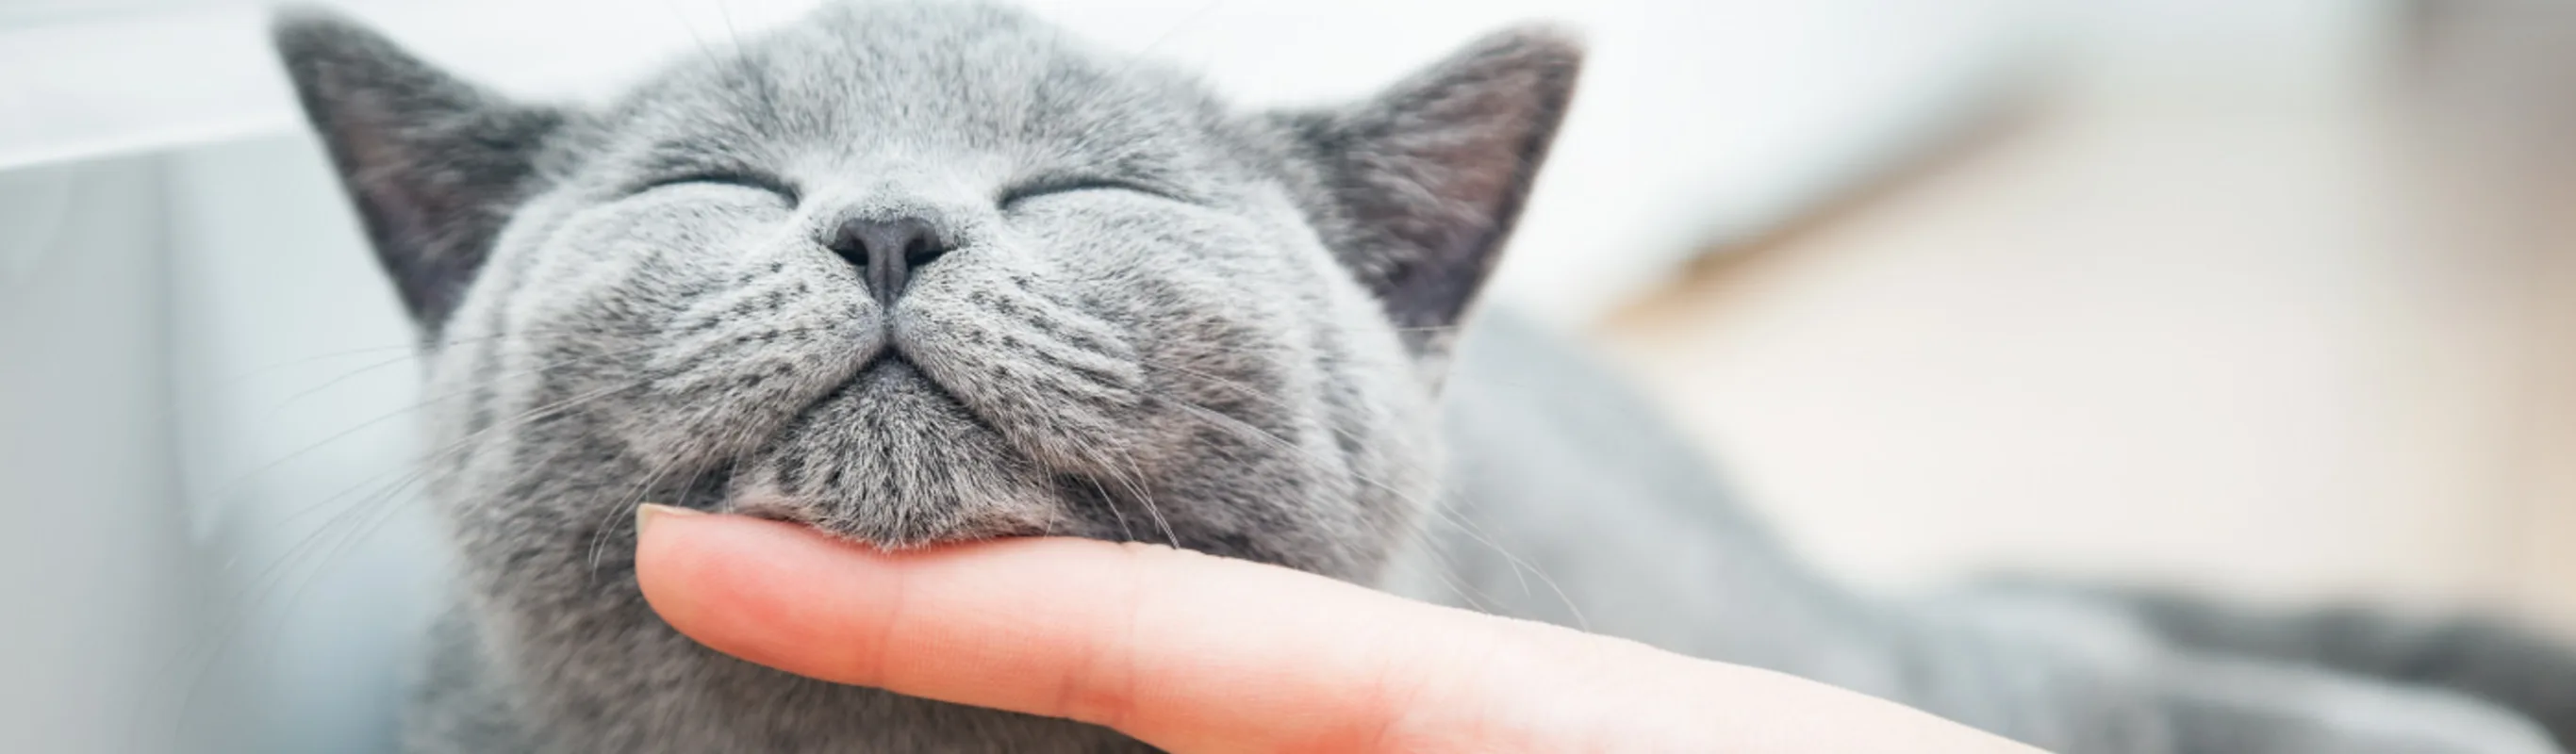 Cat having its chin rubbed with a finger